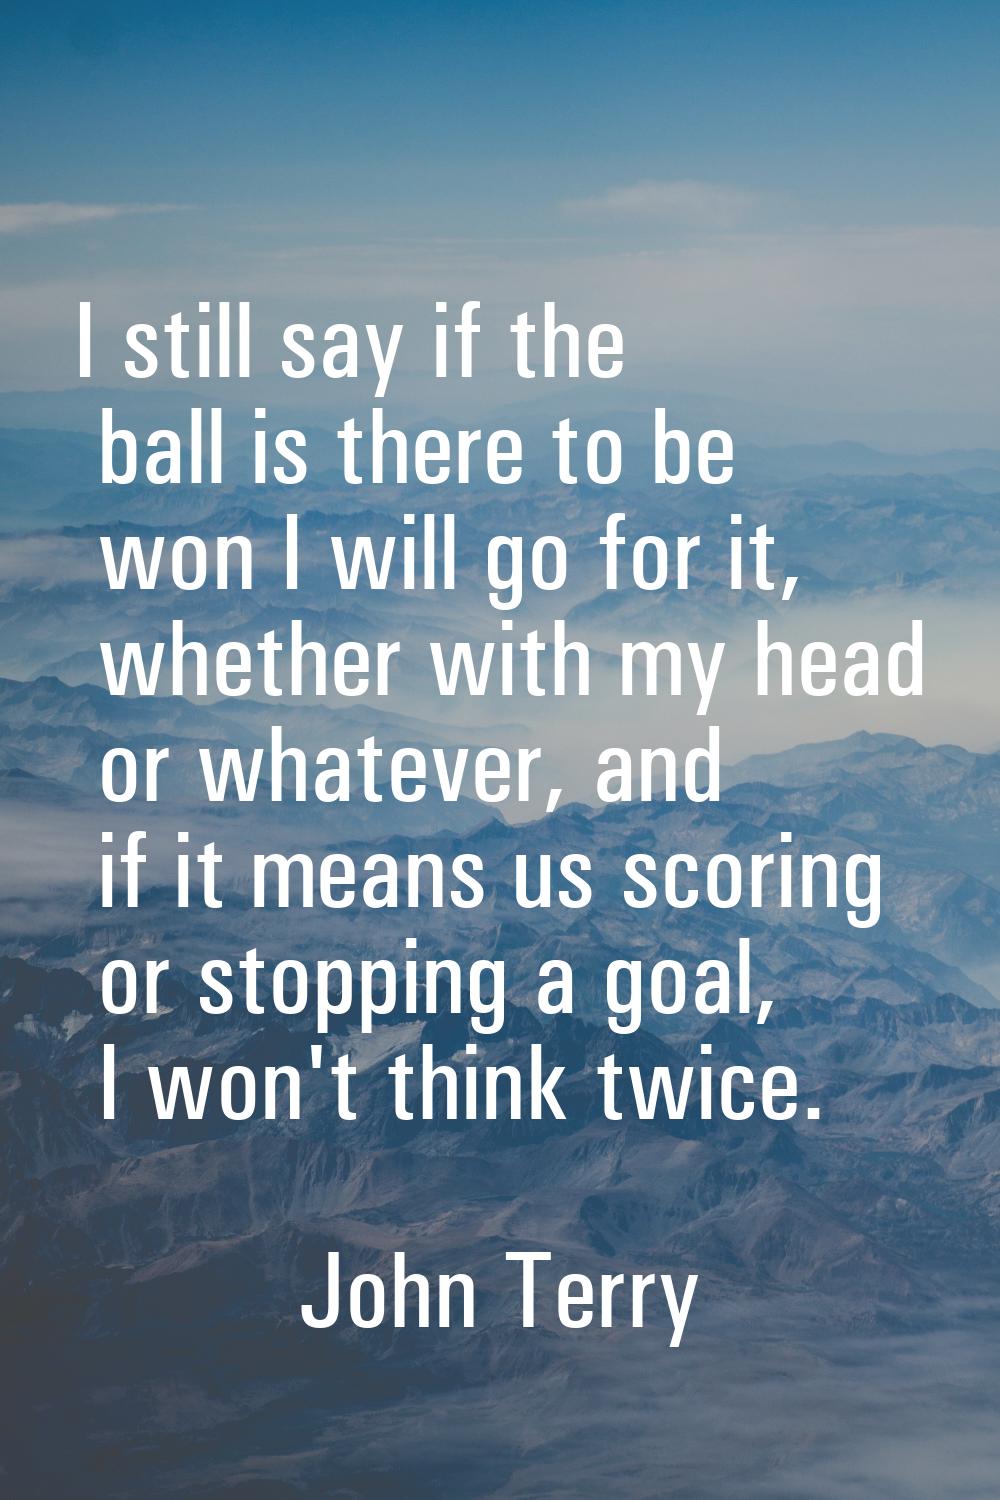 I still say if the ball is there to be won I will go for it, whether with my head or whatever, and 